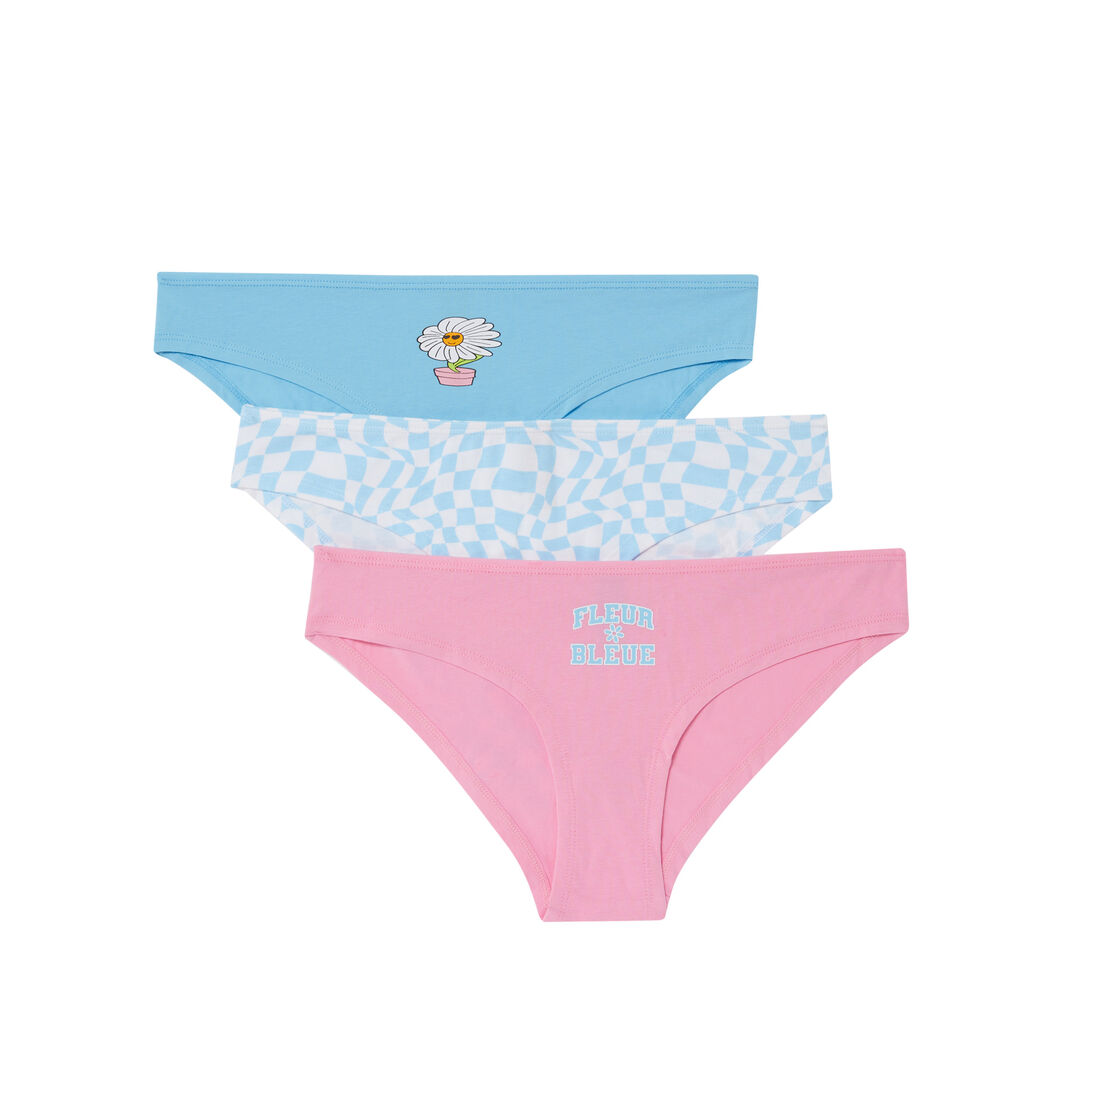 3-pack of floral briefs - blue;